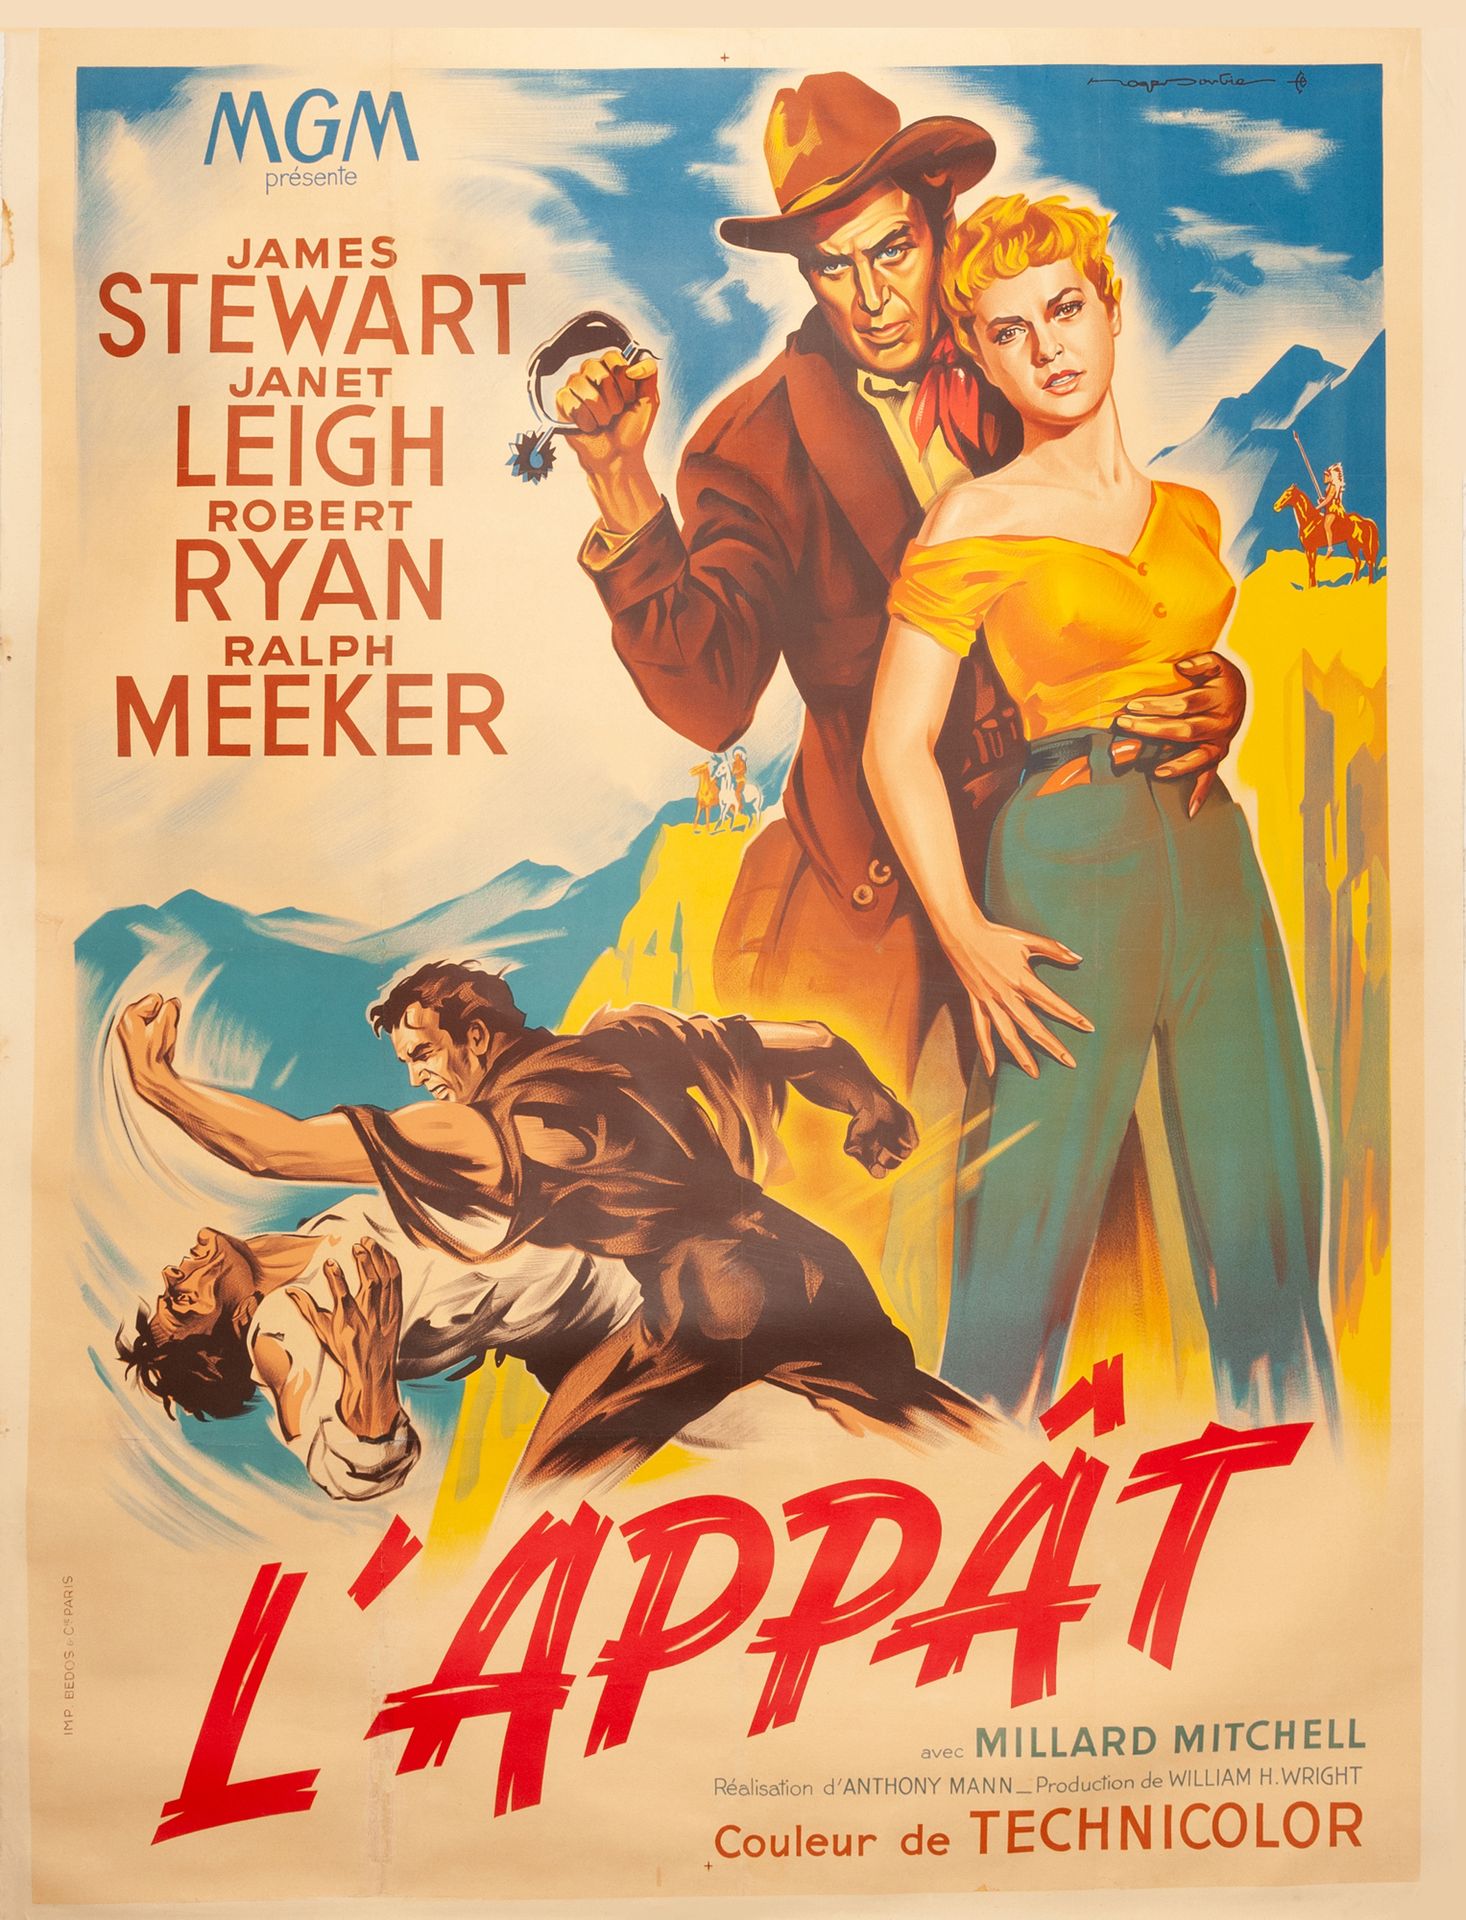 Null L'APPAT / THE NAKED SPUR Anthony Mann. 1953.
120 x 160 cm. French poster. R&hellip;